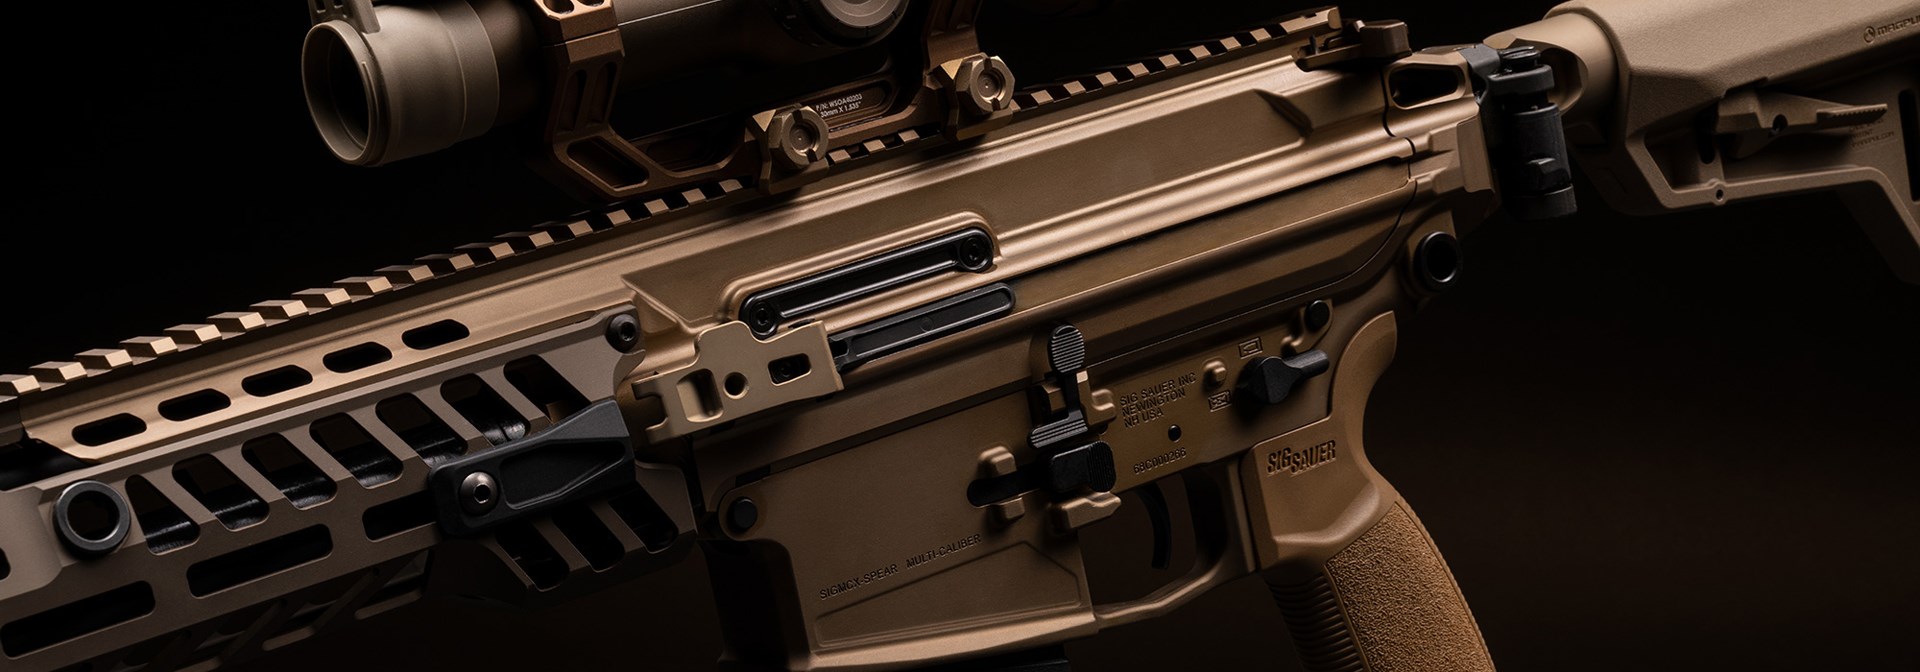 Left side close-up of the controls on the SIG Sauer MCX-Spear rifle.